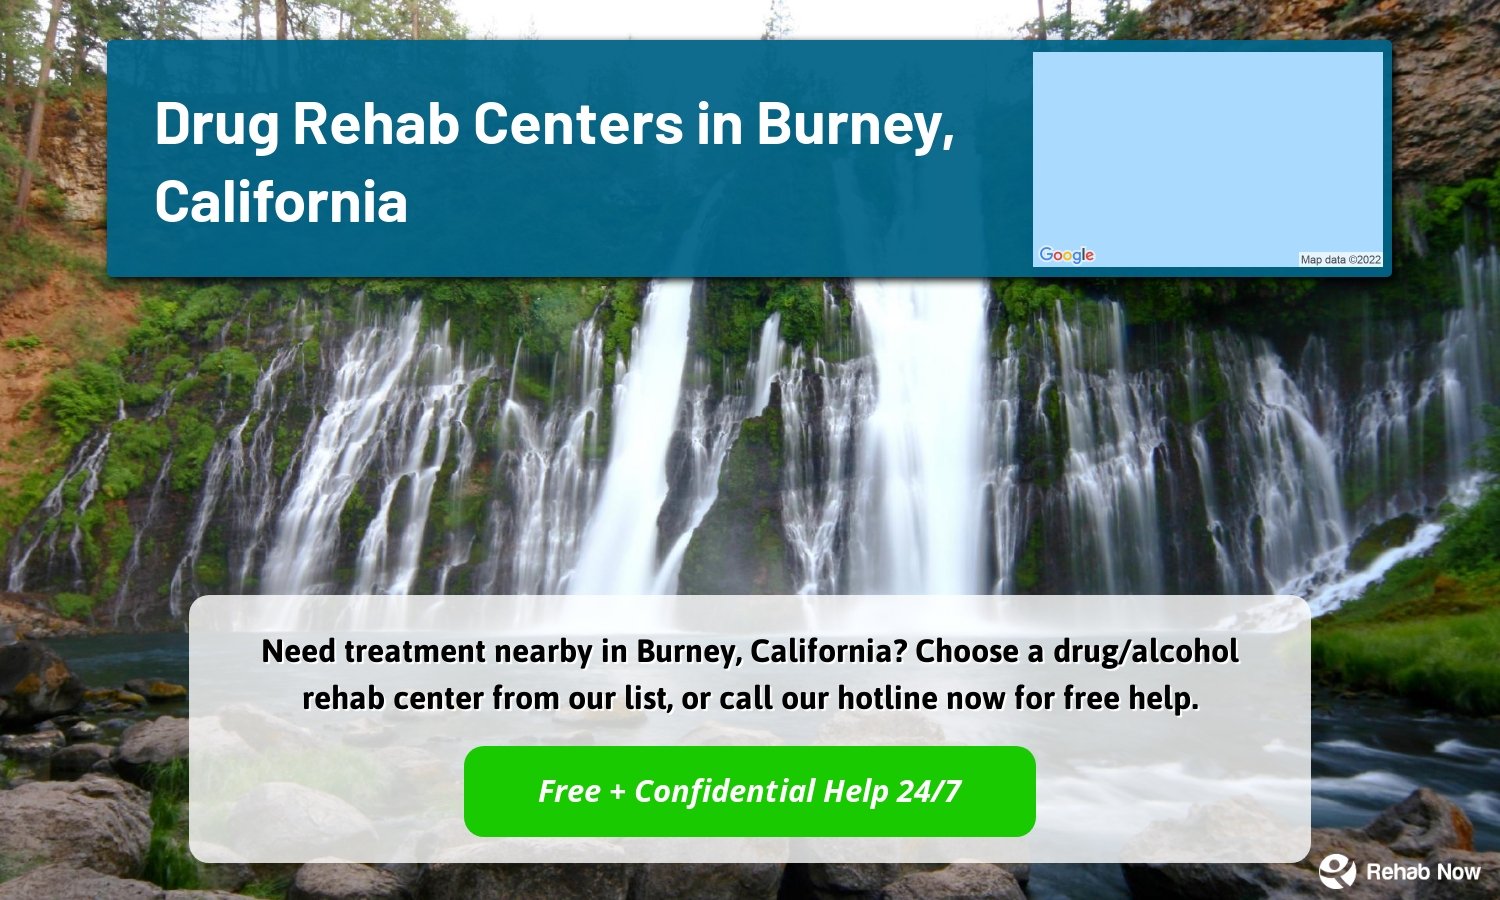 Need treatment nearby in Burney, California? Choose a drug/alcohol rehab center from our list, or call our hotline now for free help.